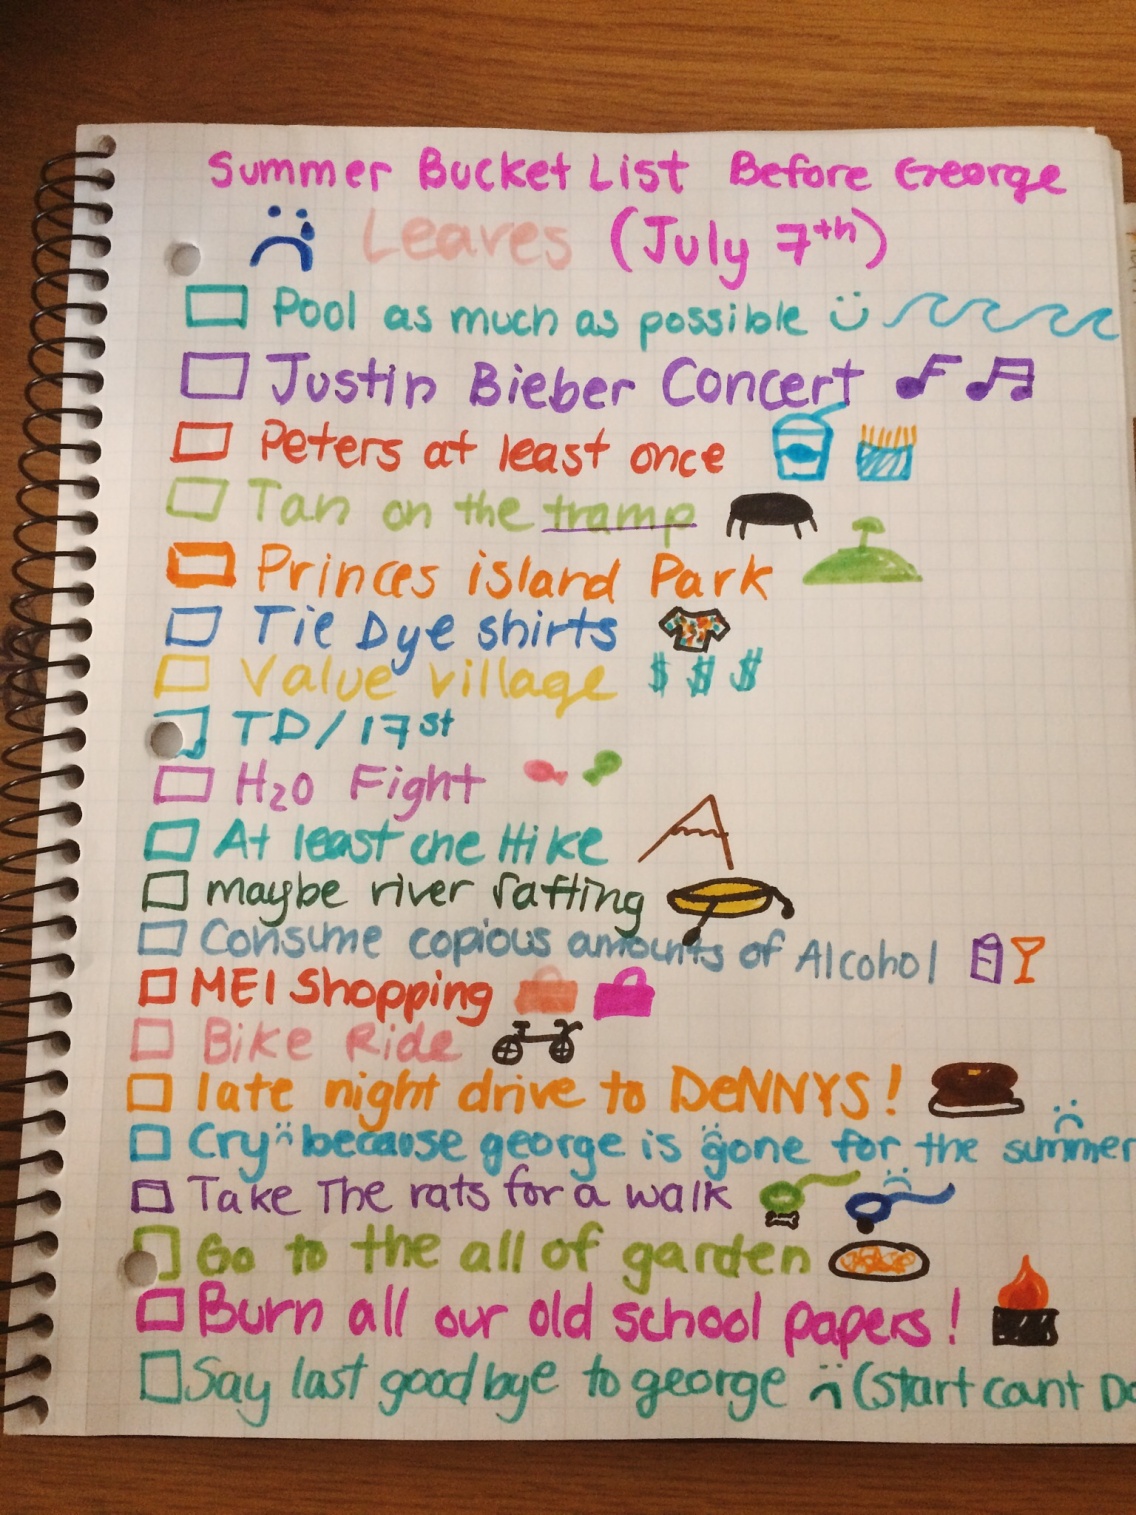 Really Lame Summer Bucket List Before George Leaves To Travel The